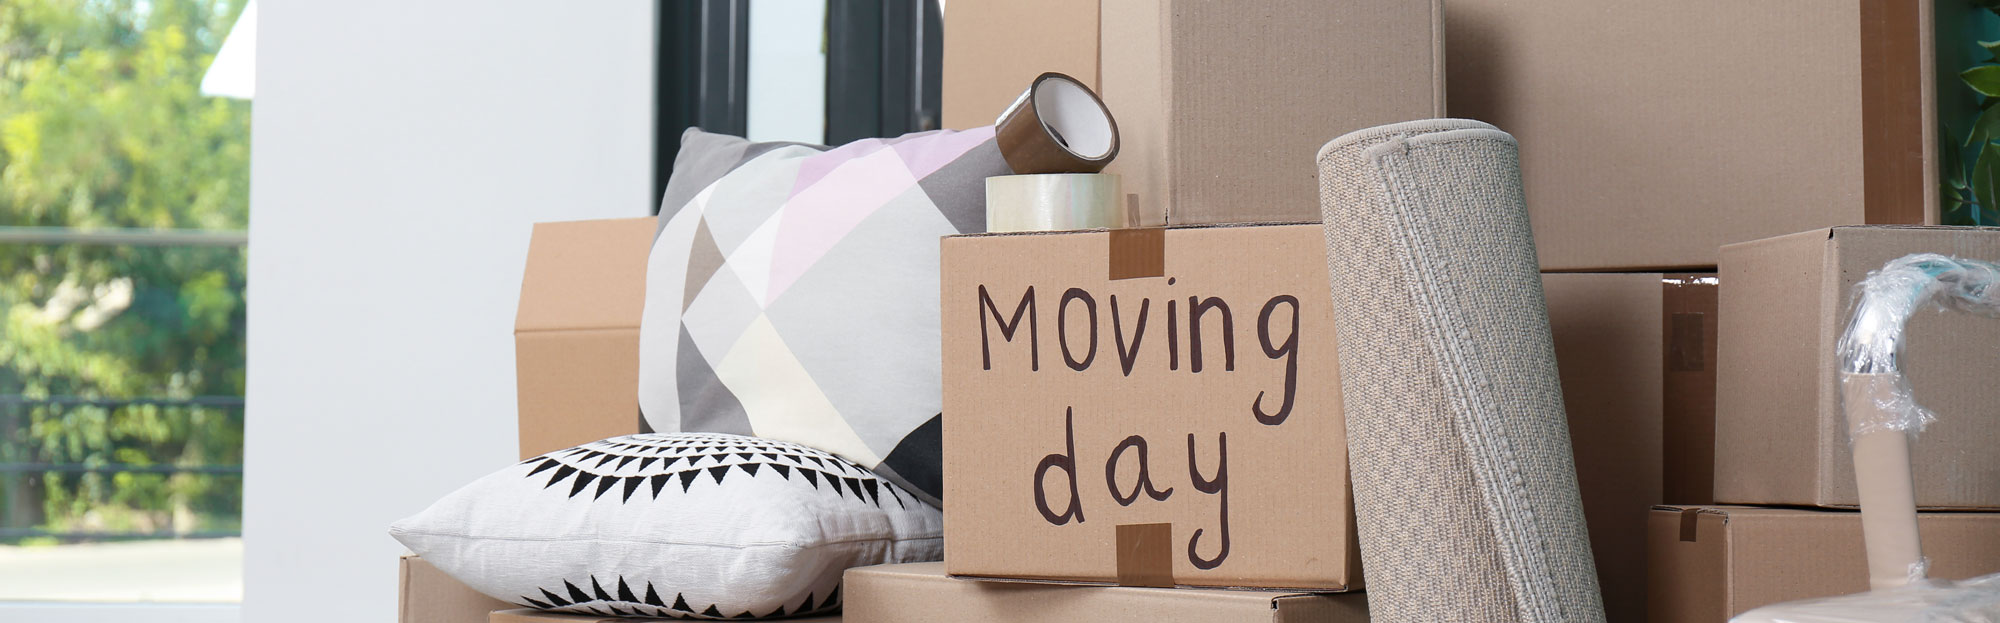 Move-Out Bg